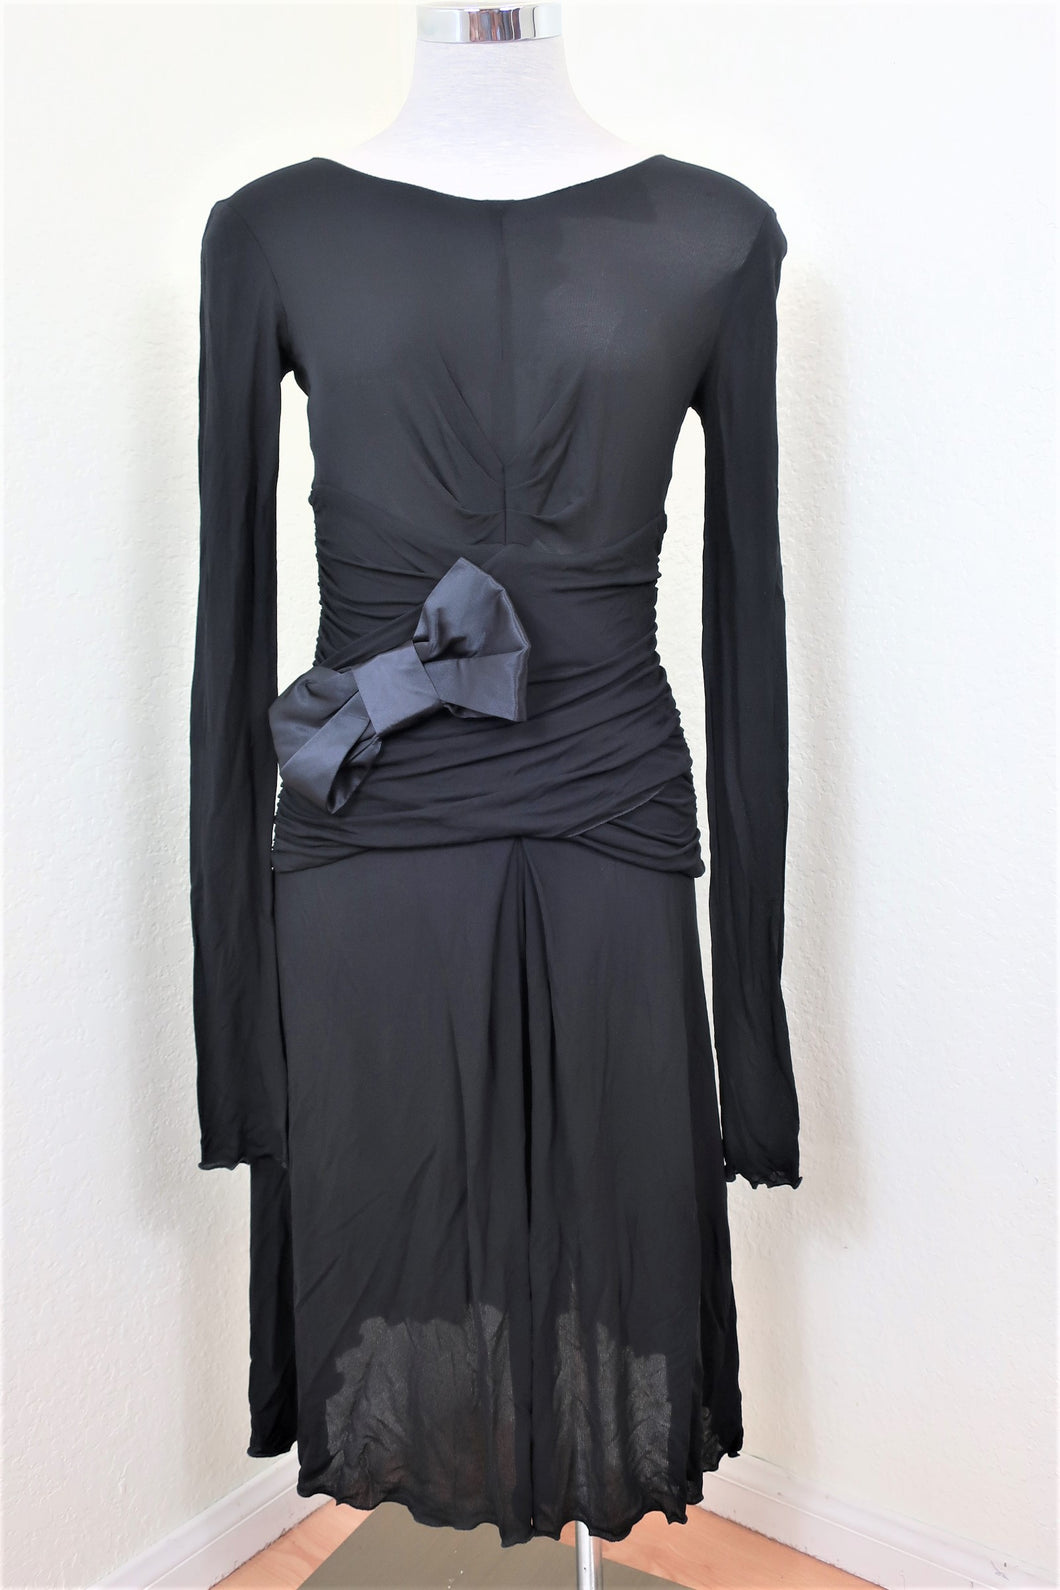 Vintage DOLCE & GABBANNA Black Ruched Long SLeeves Bodycon Sheer Gown Dress Small 40 6 7 8